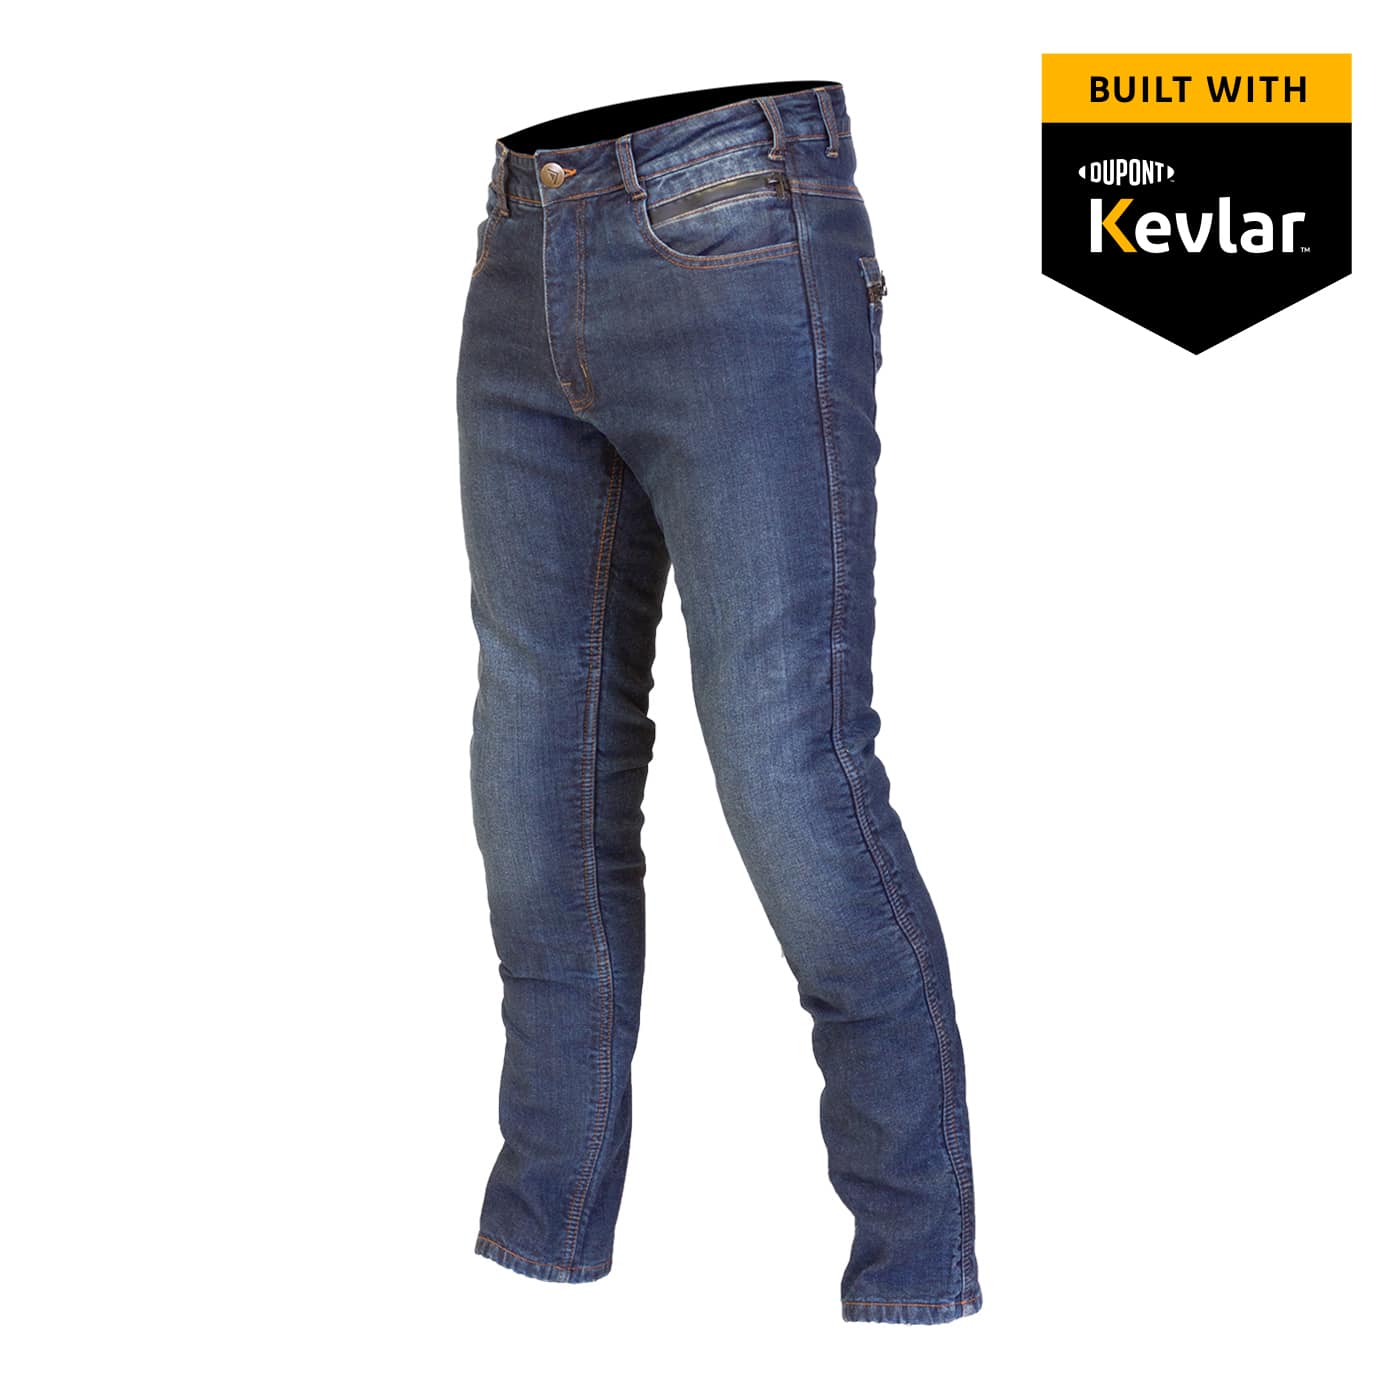 Thin blue line: Best single layer motorcycle jeans